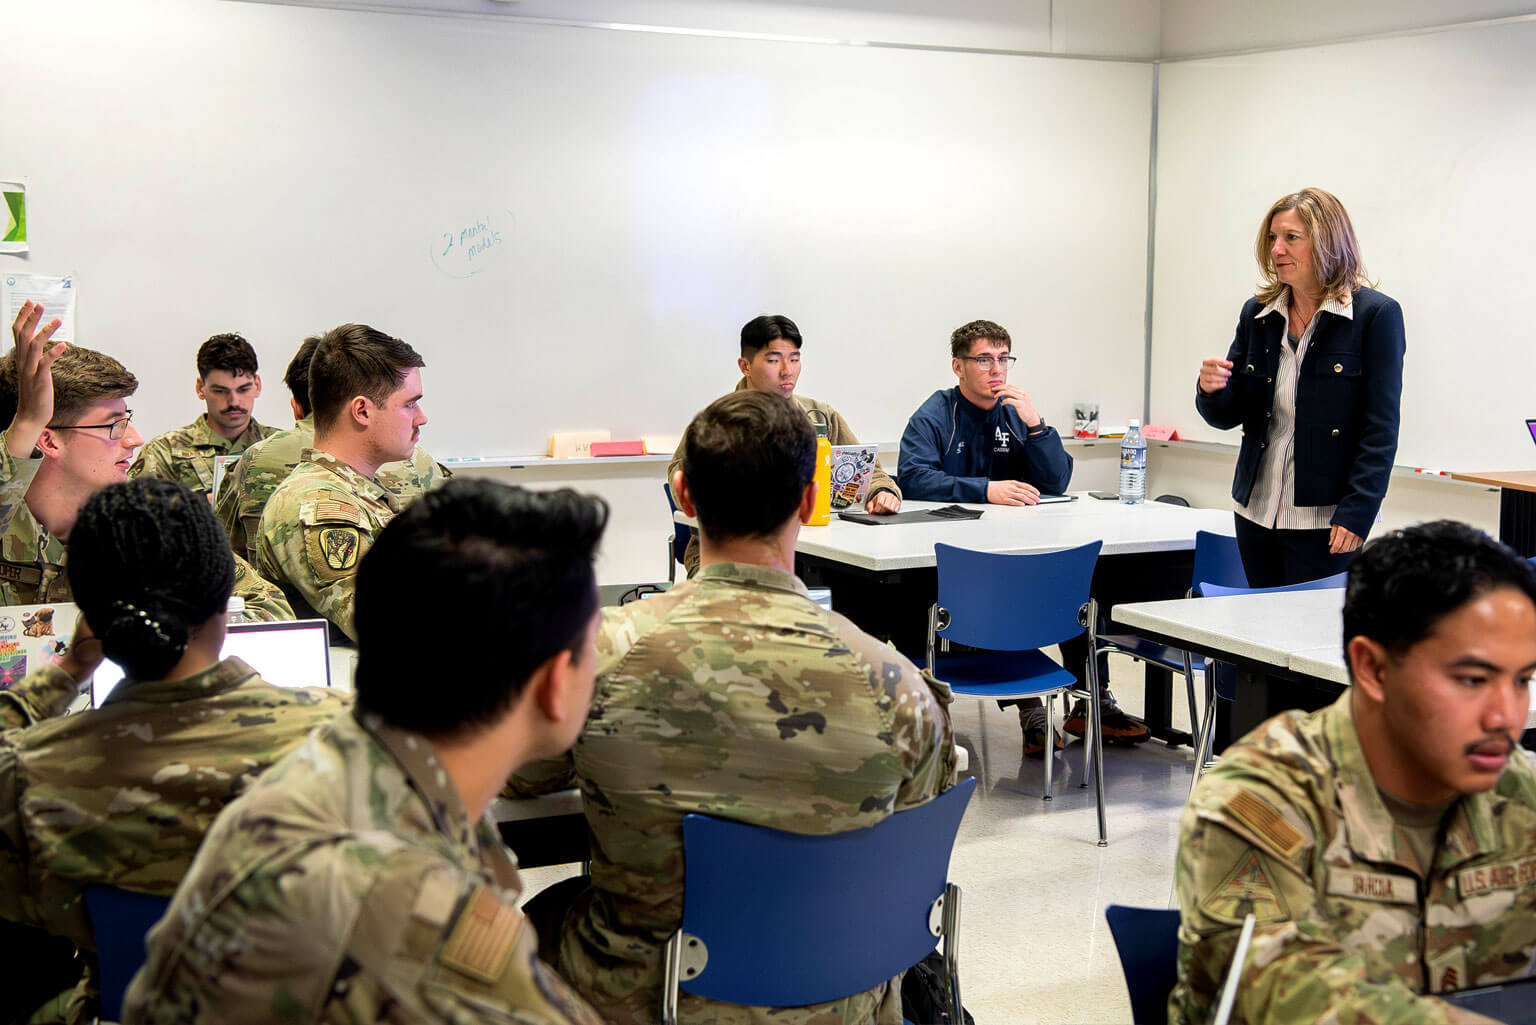 Dr. Amanda Metcalfe, U.S. Air Force Academy Behavioral Sciences and Leadership assistant professor, answers a question during an introductory leadership class at the Academy.